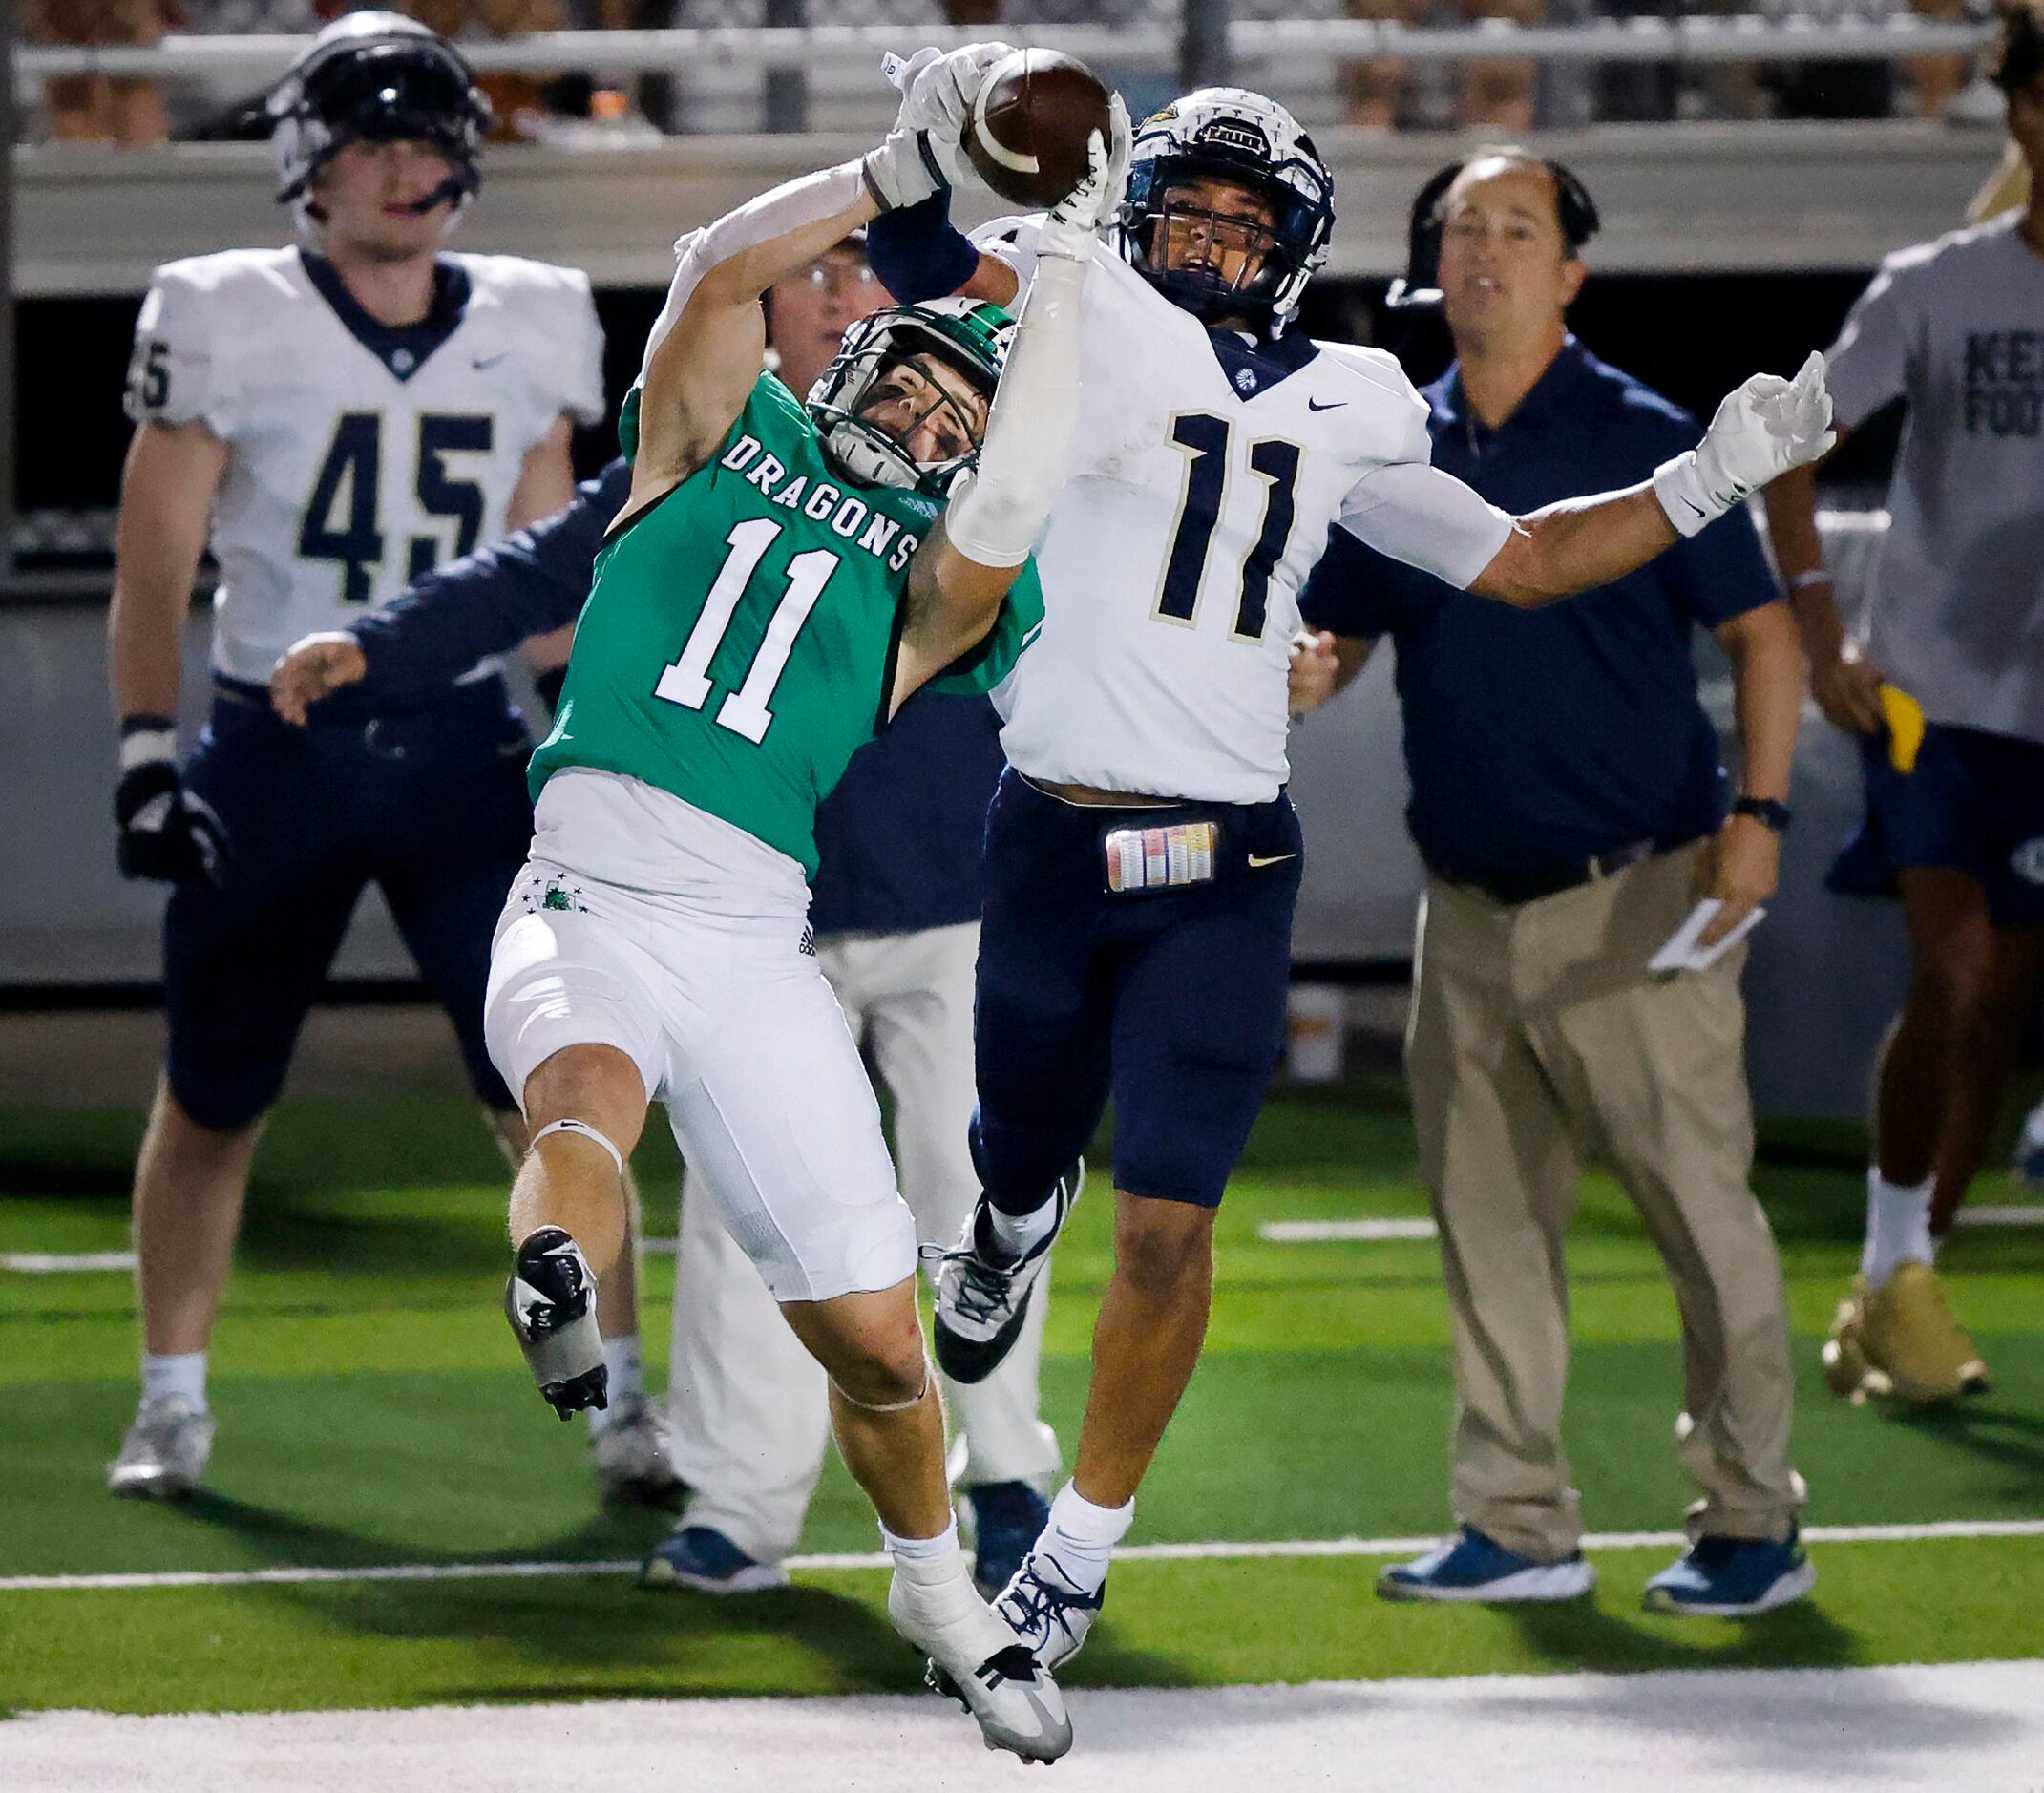 Southlake Carroll defensive back J David Sparks (11) attempts to intercept a pass intended...